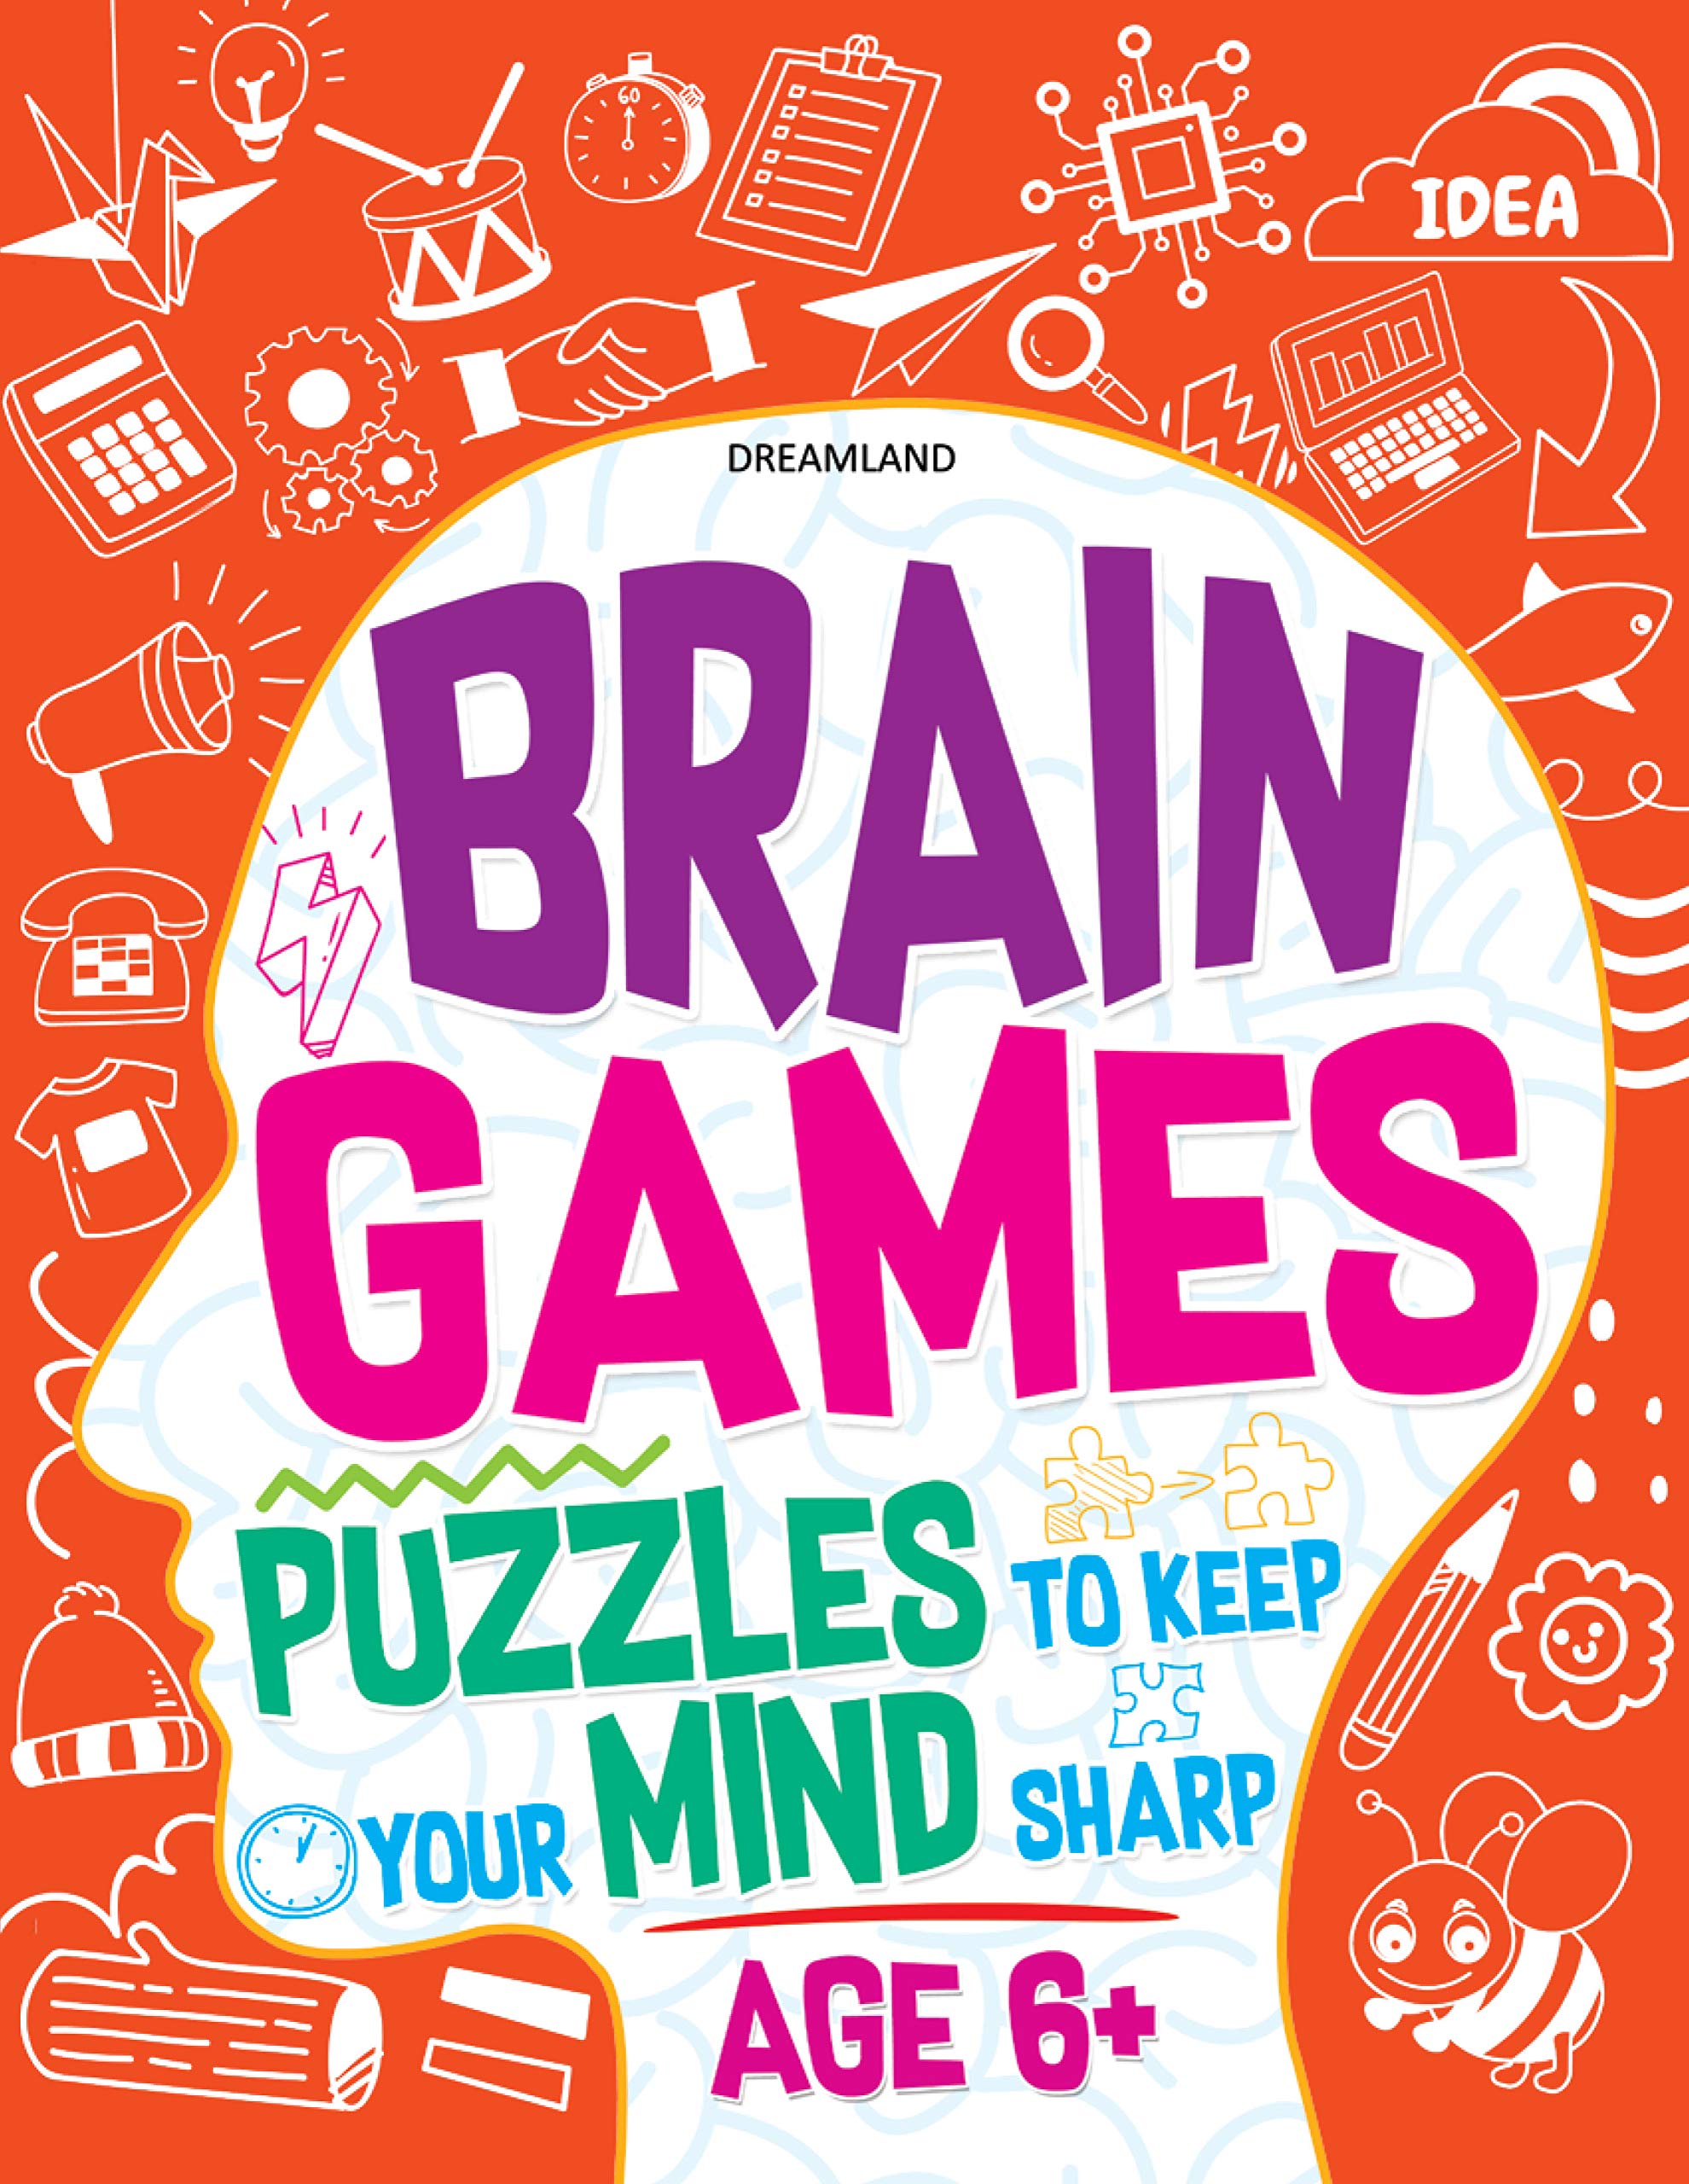 Brain Games (Puzzles to keep your Mind sharp Age 6+)